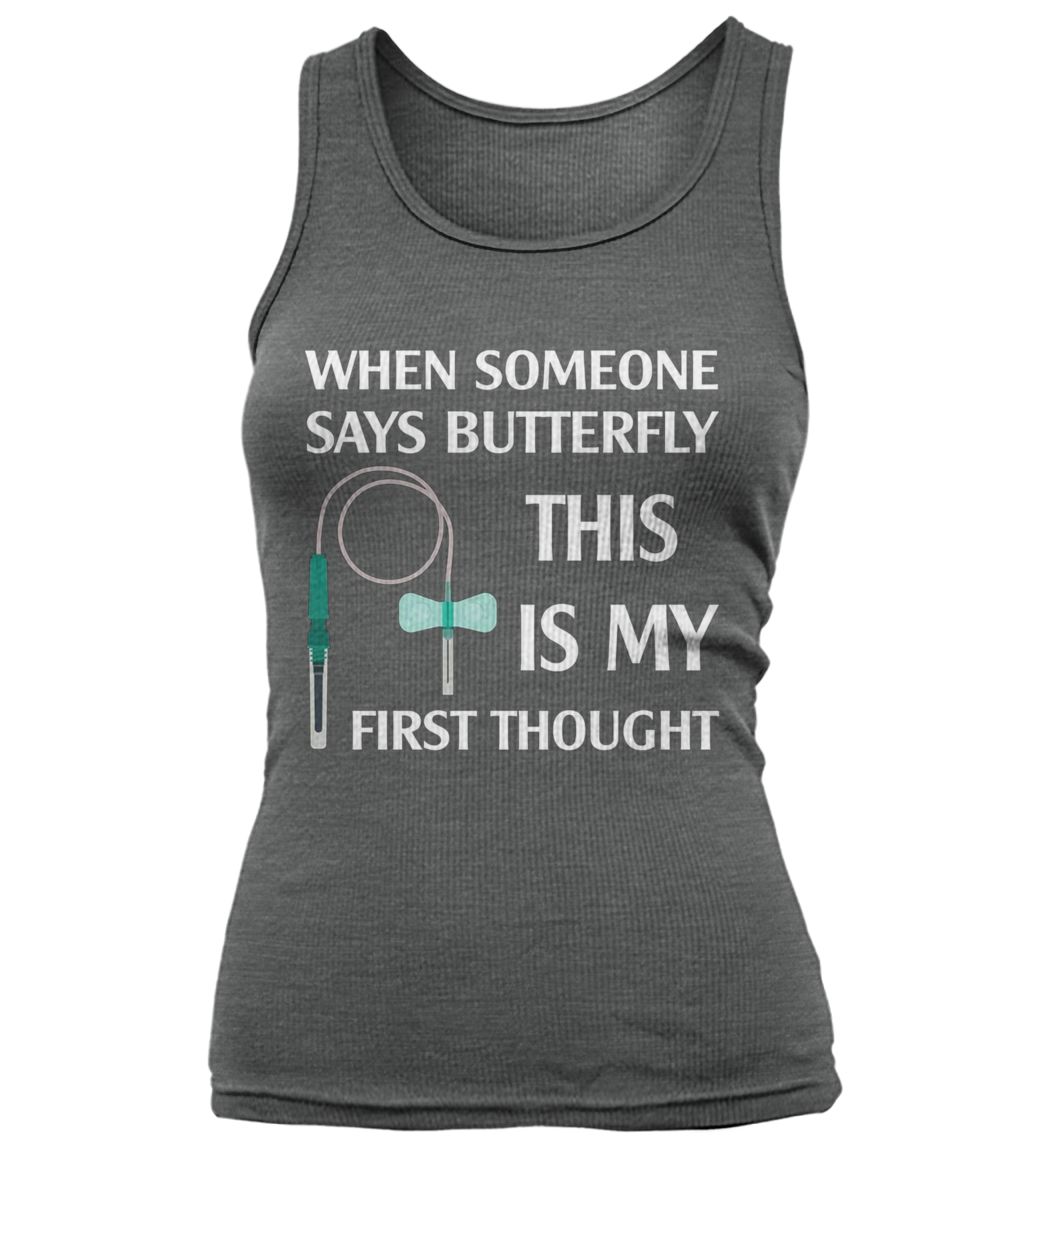 When someone says butterfly this is my first thought nurse women's tank top